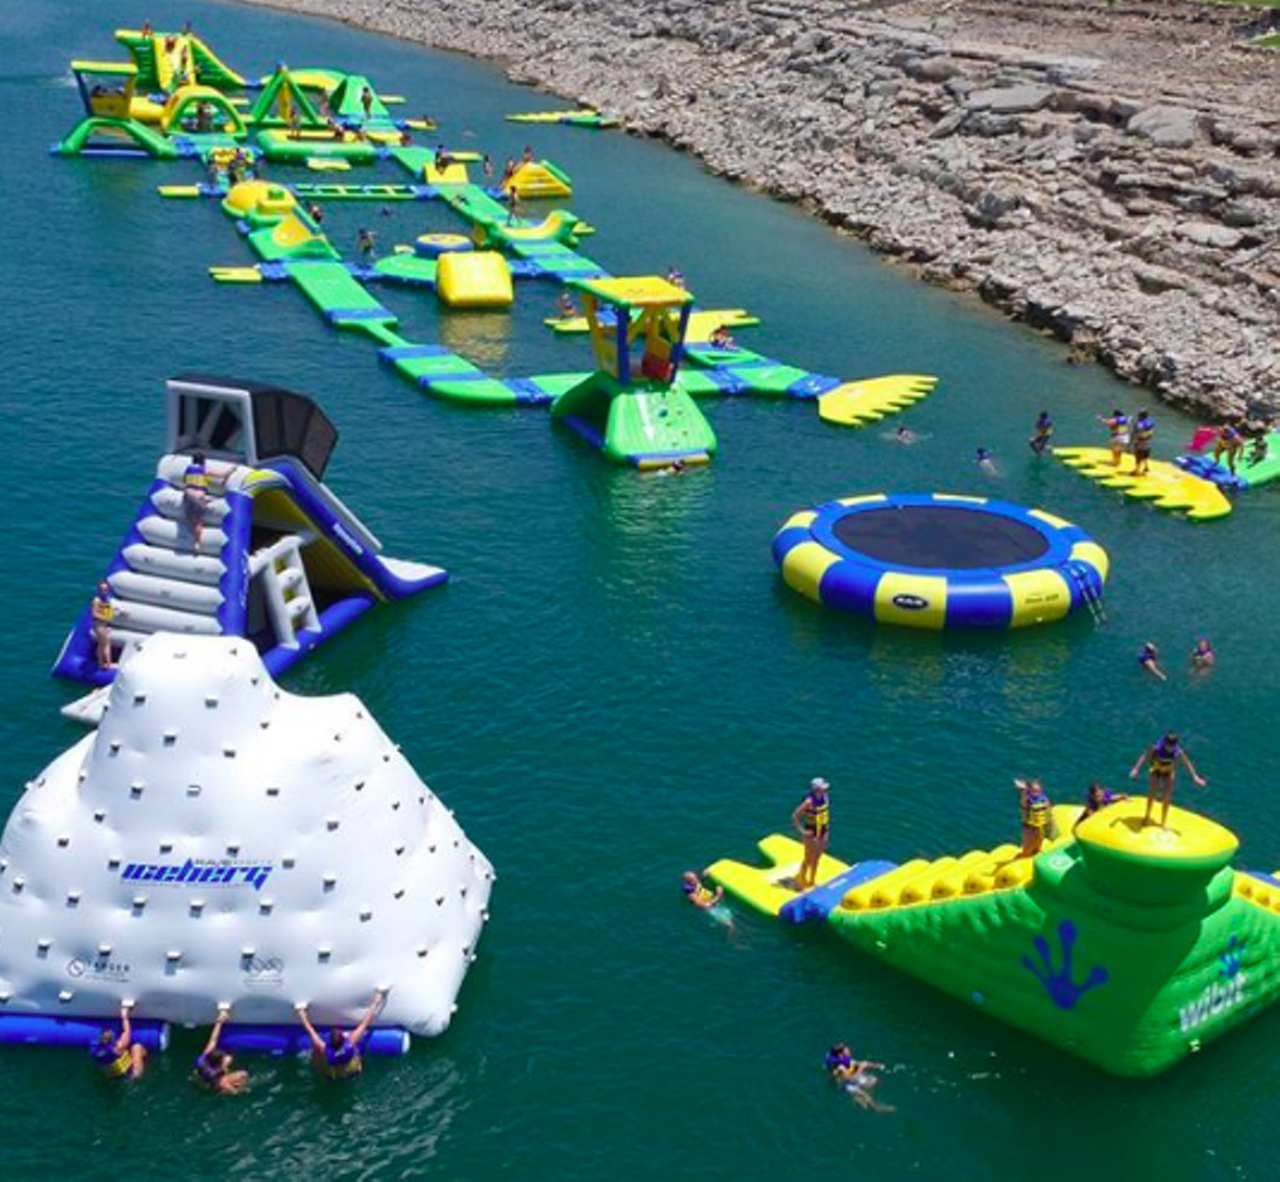 Waterloo Adventures
14529 Pocohontas Trail, Leander, (512) 614-1979, waterlooadventures.com
Just outside of Austin you’ll find one of the most badass outdoor attractions in the area. This water park is floating – mean that it’s on water! You’ll get to bounce off the slides and jump around the obstacle course and straight into the water. What more could you ask for?!
Photo via Instagram / waterlooadventures